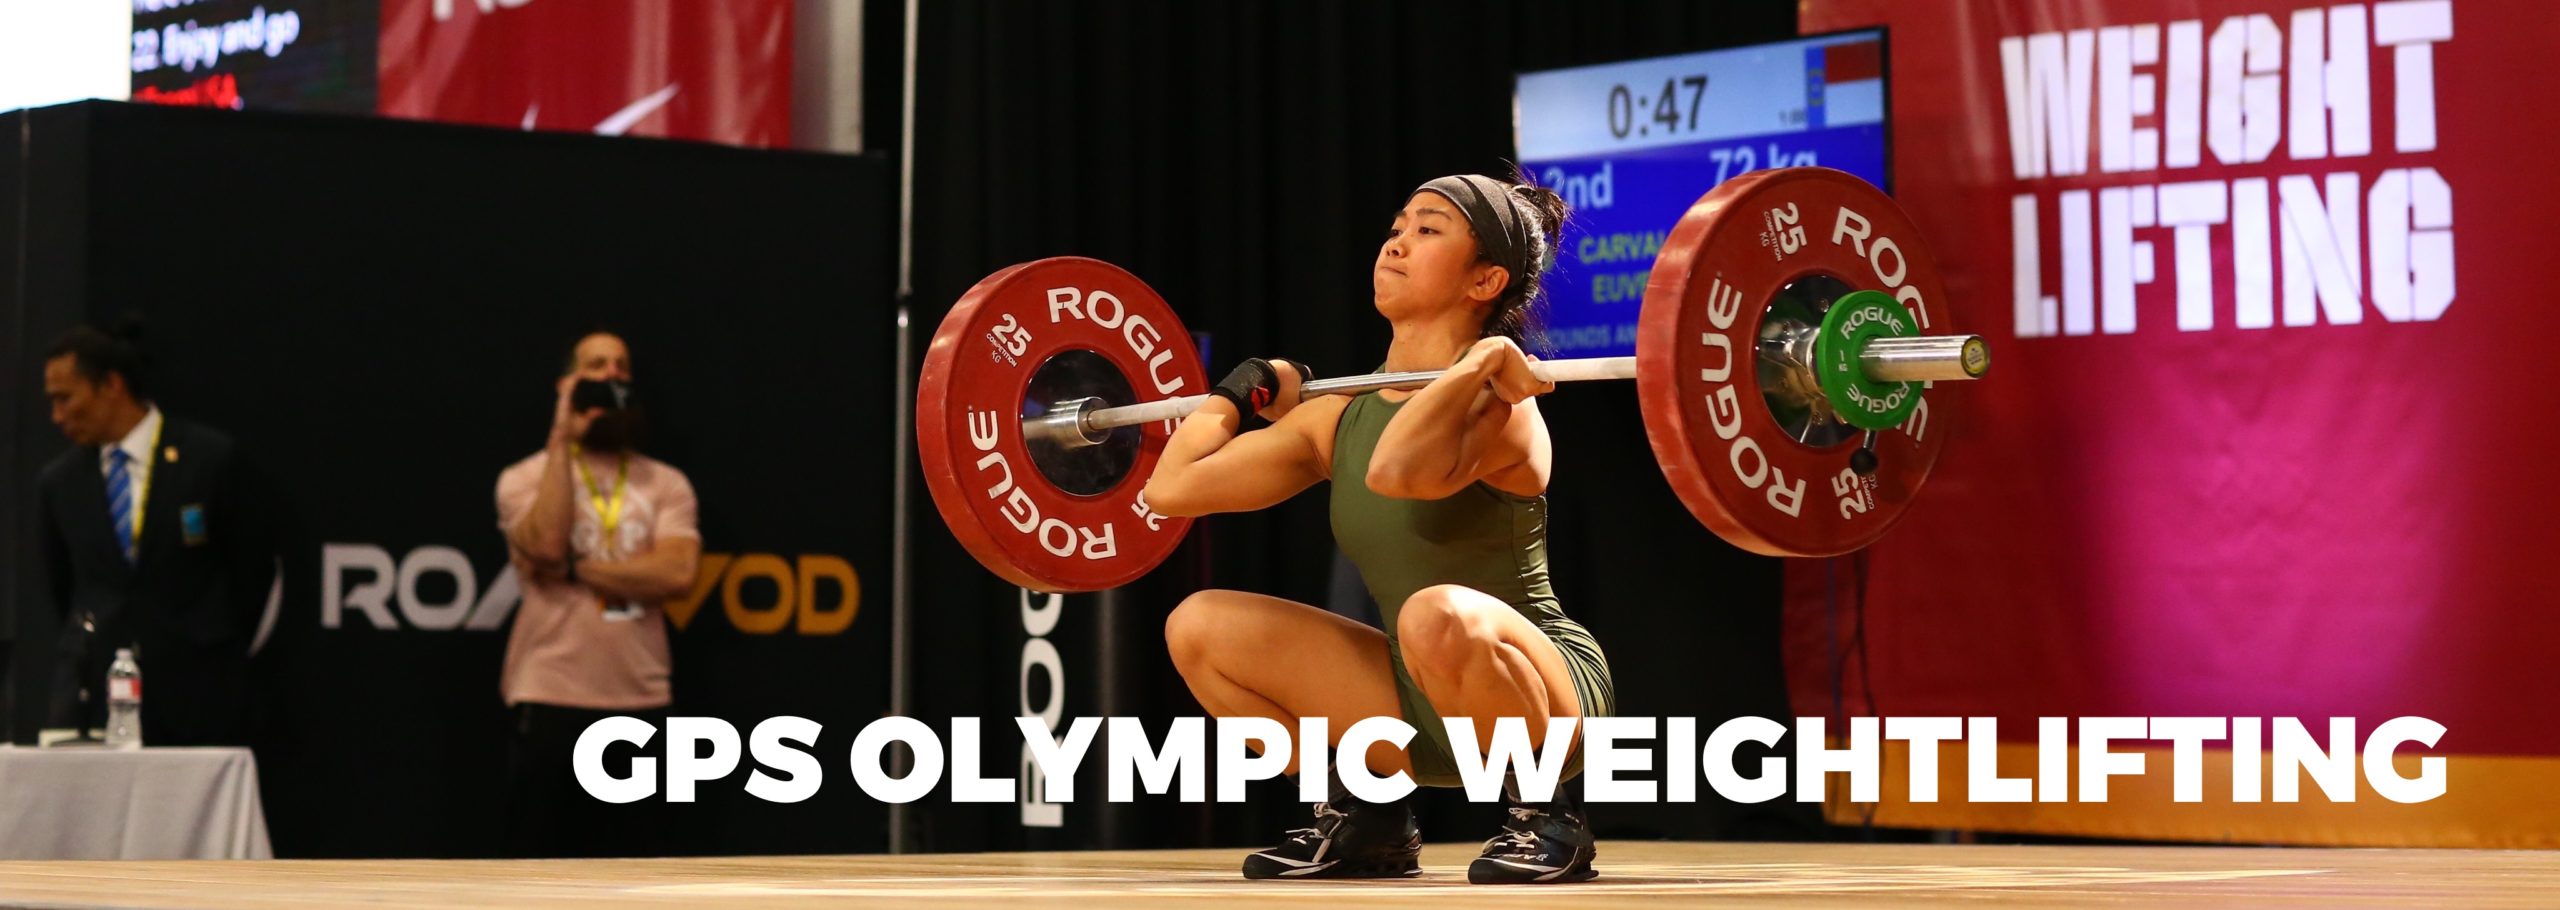 What is the GPS OLYMPIC WEIGHTLIFTING online training team?